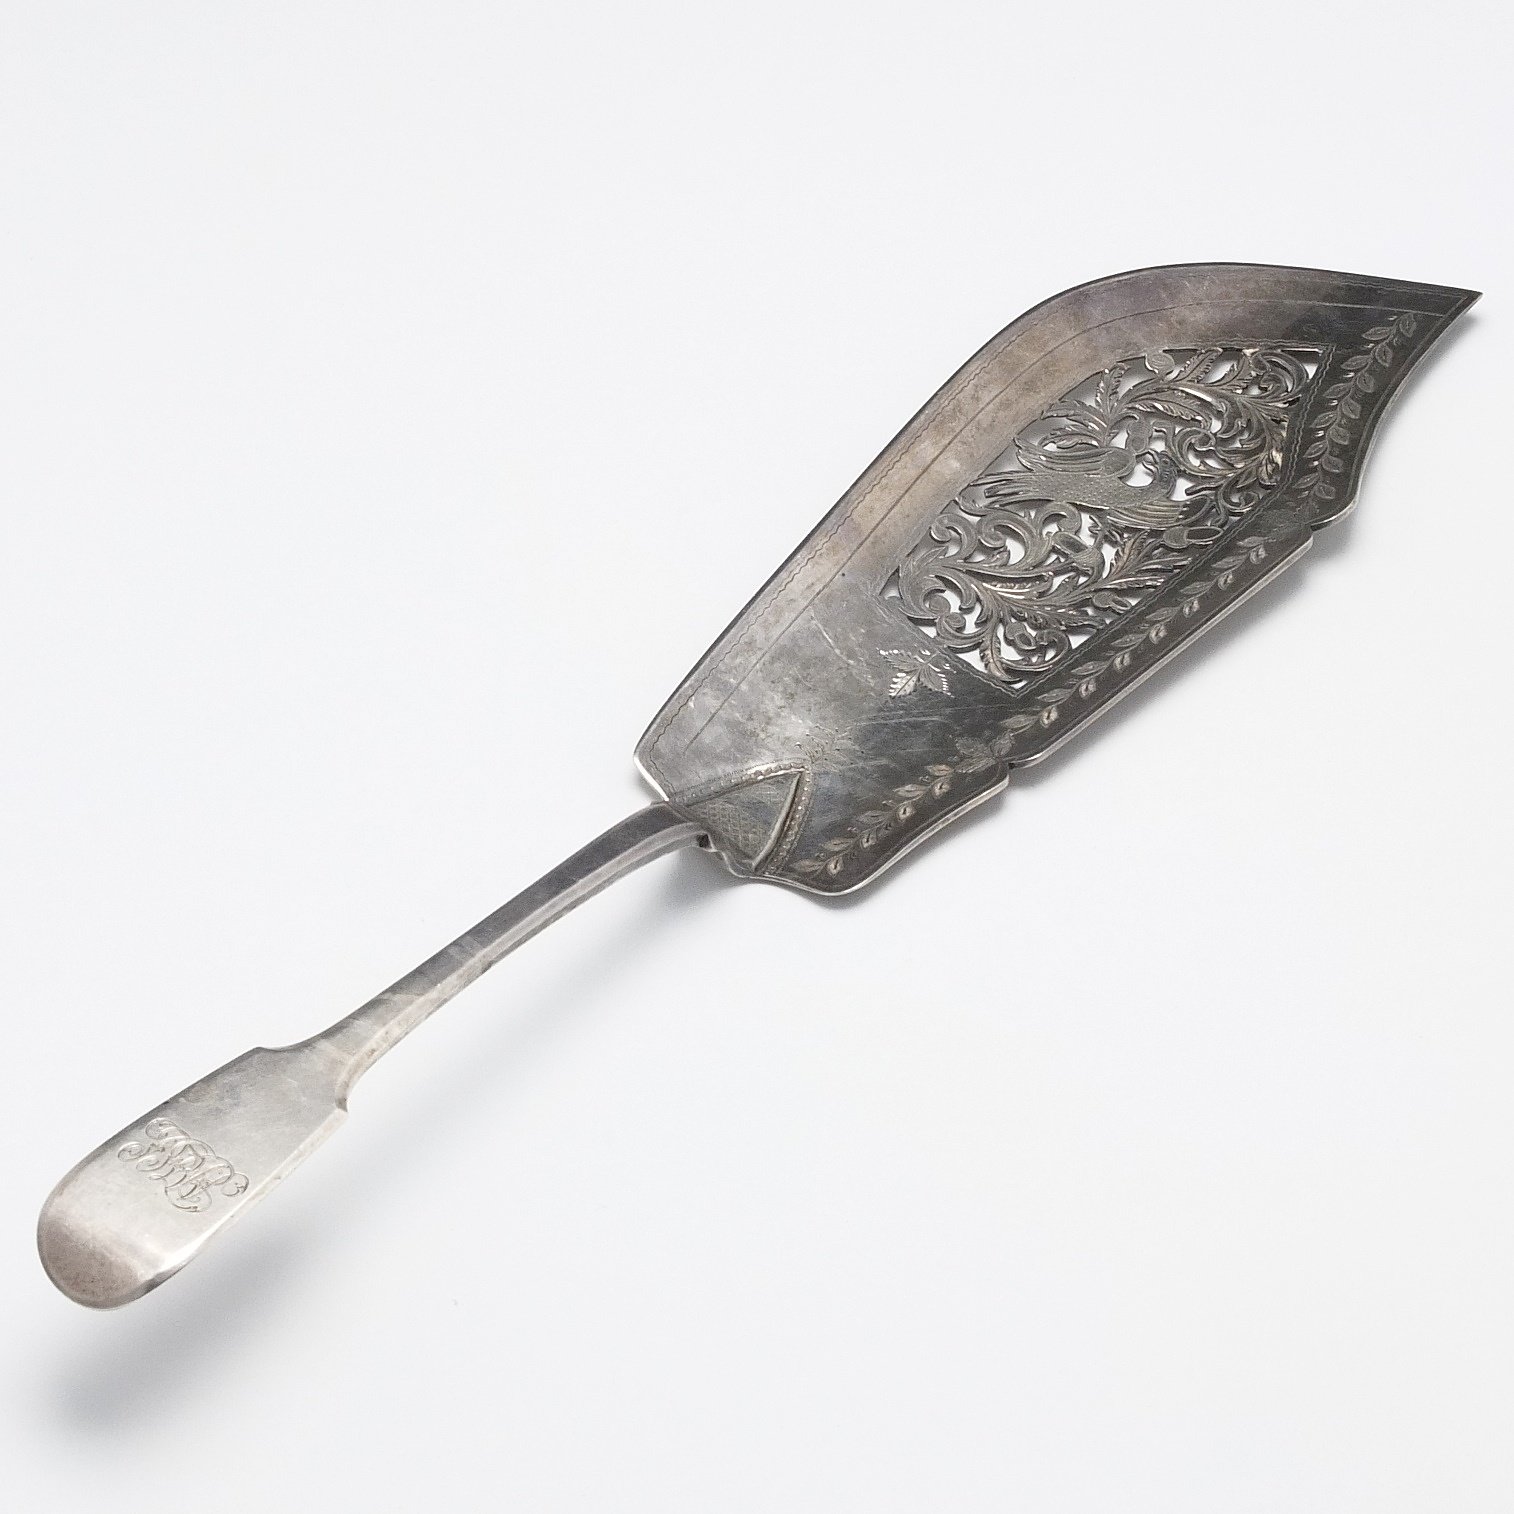 'Georgian Monogrammed Sterling Silver Fish Server with Bright Cut and Pierced Peacock and Acorn Blade A B Savory & Sons London 1833'